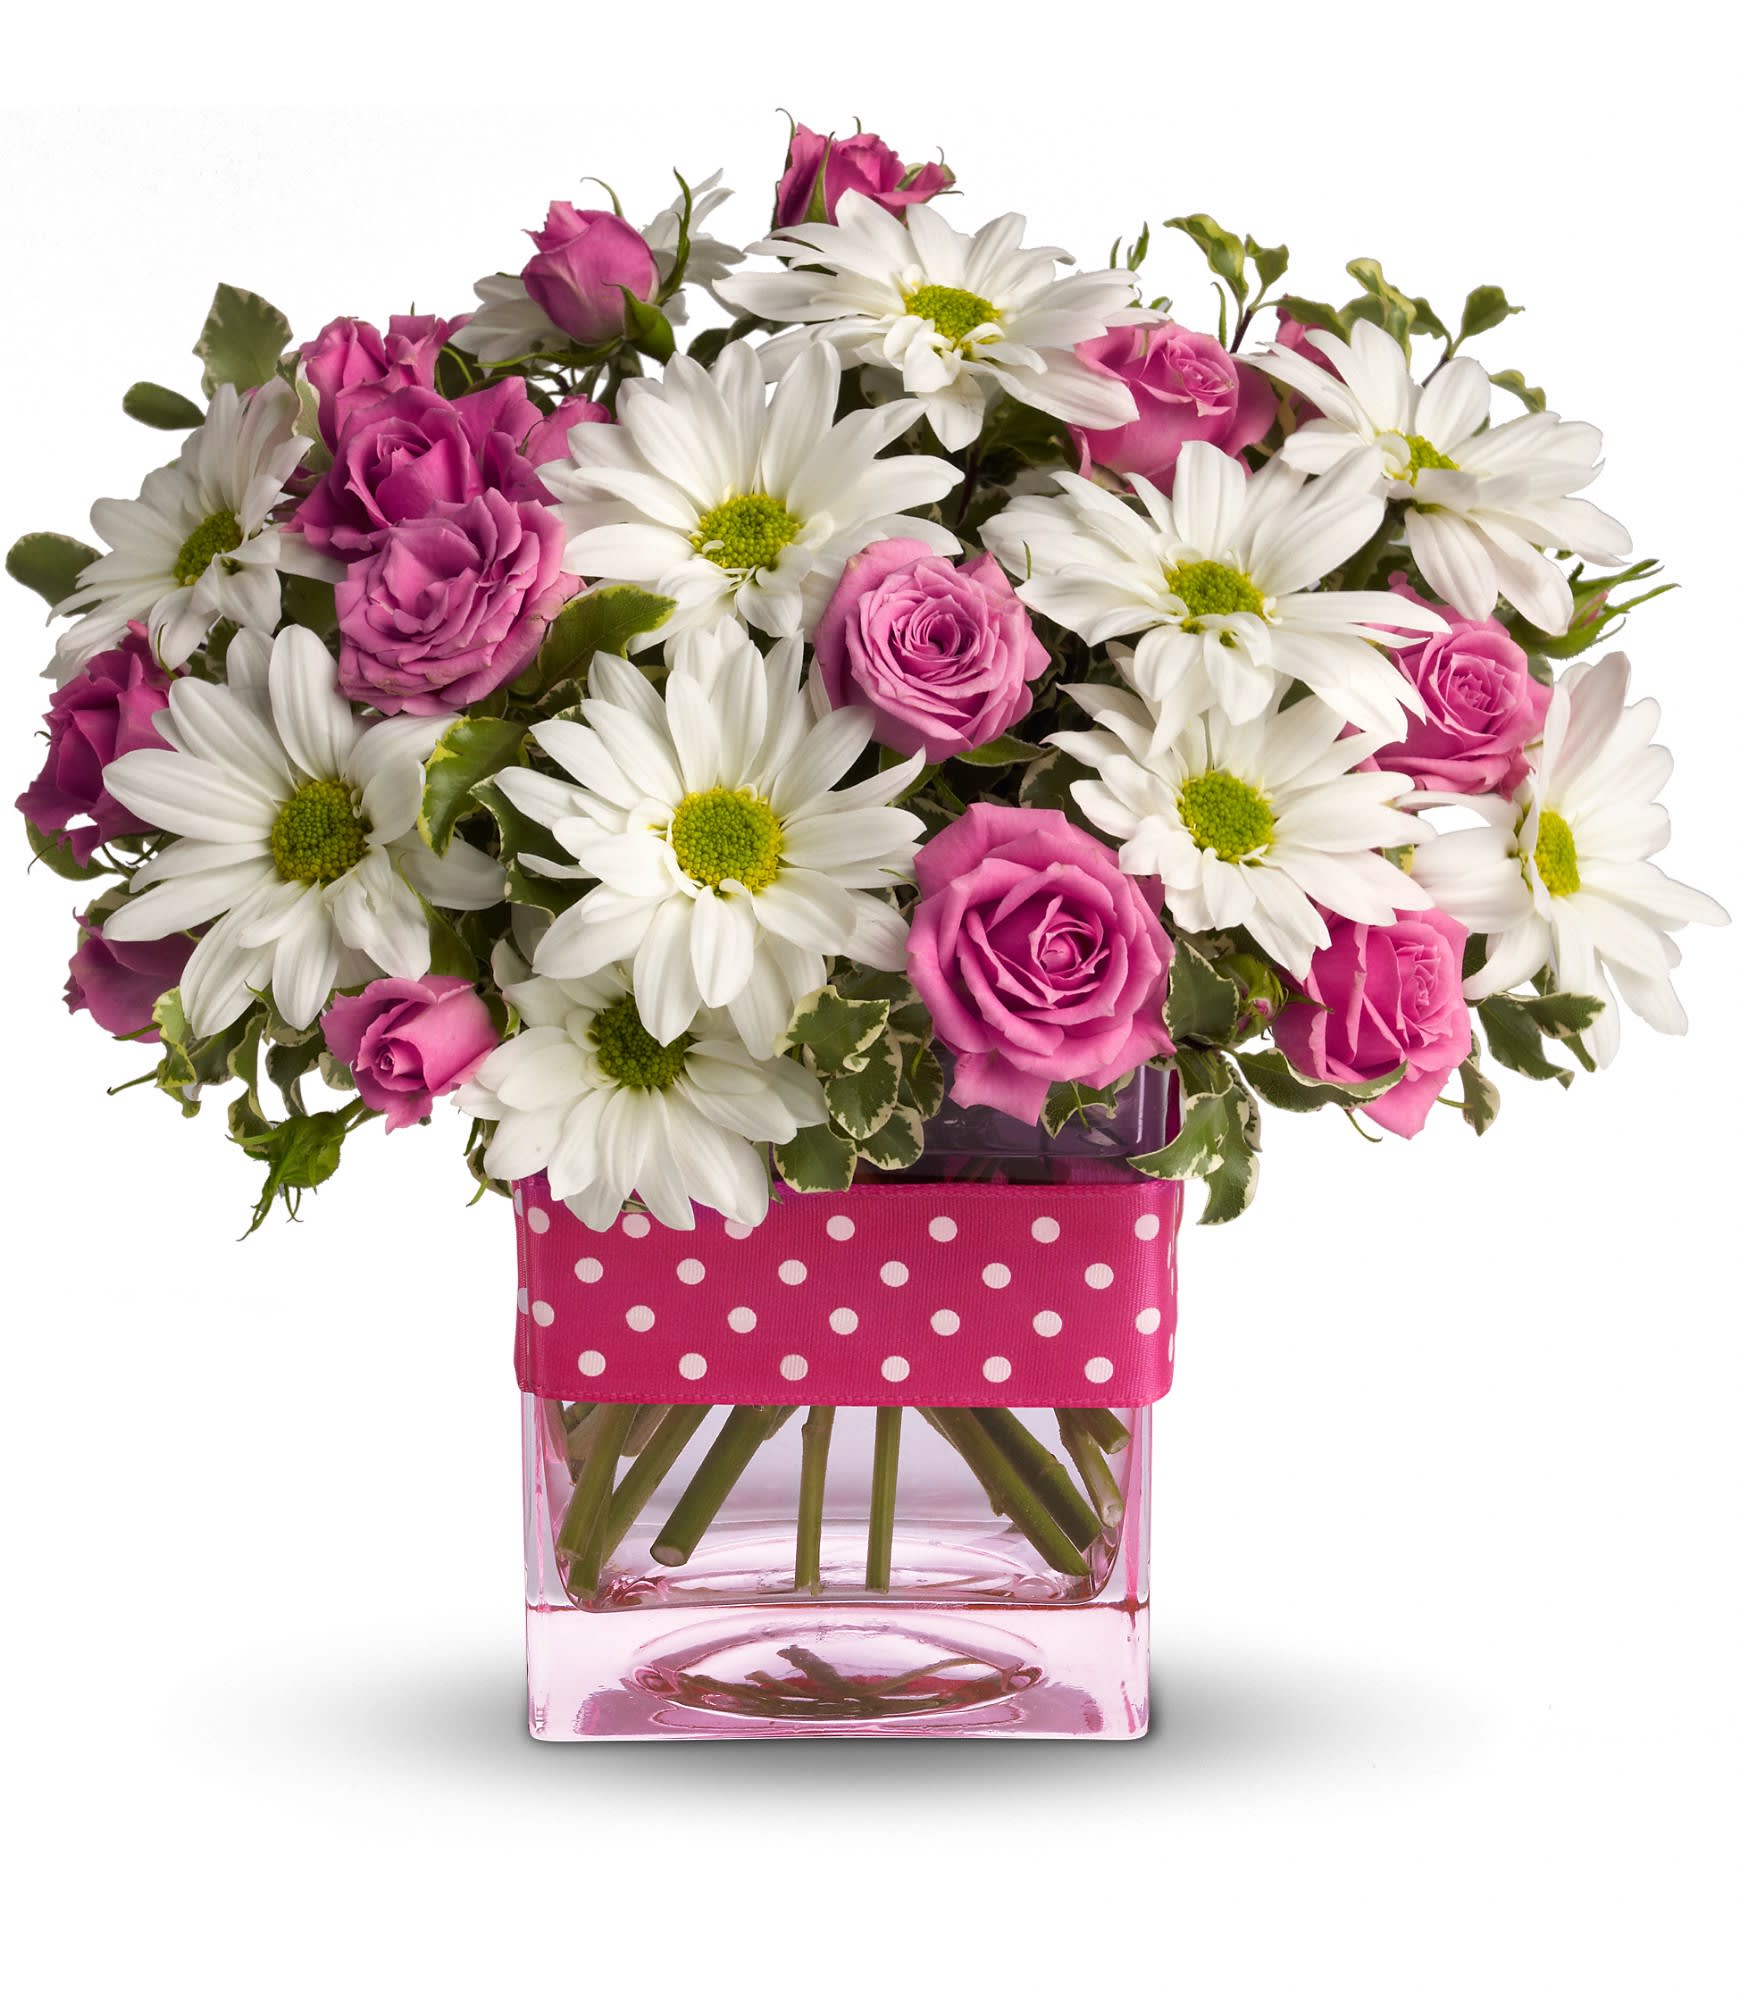 Funeral Flowers delivery by Florist of Riverside - a Riverside CA Florist